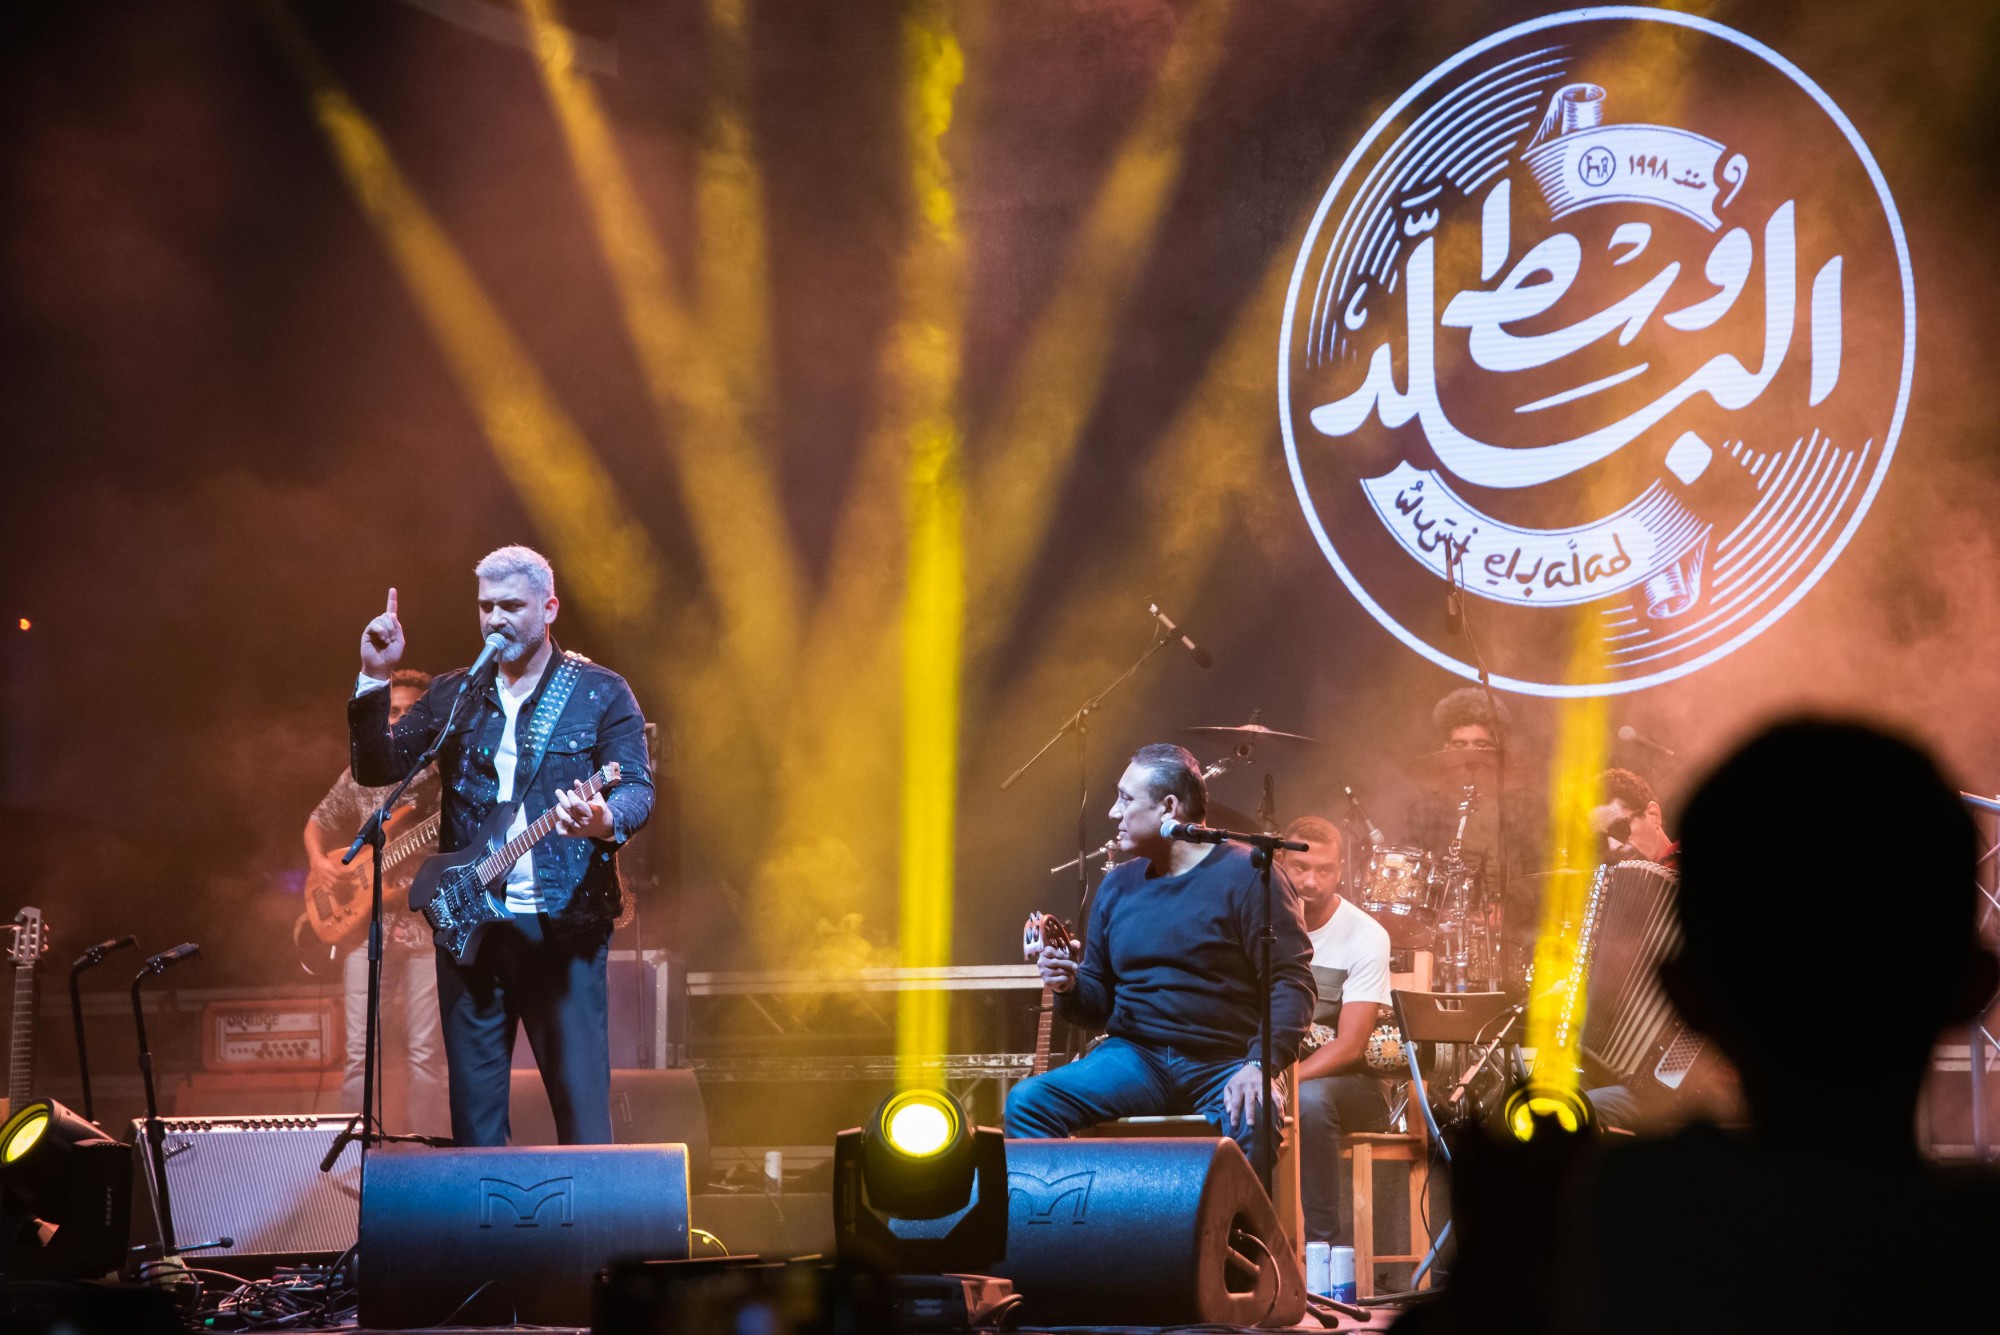 Wust El Balad perform during the Street Music Series at Earth Plaza m71993